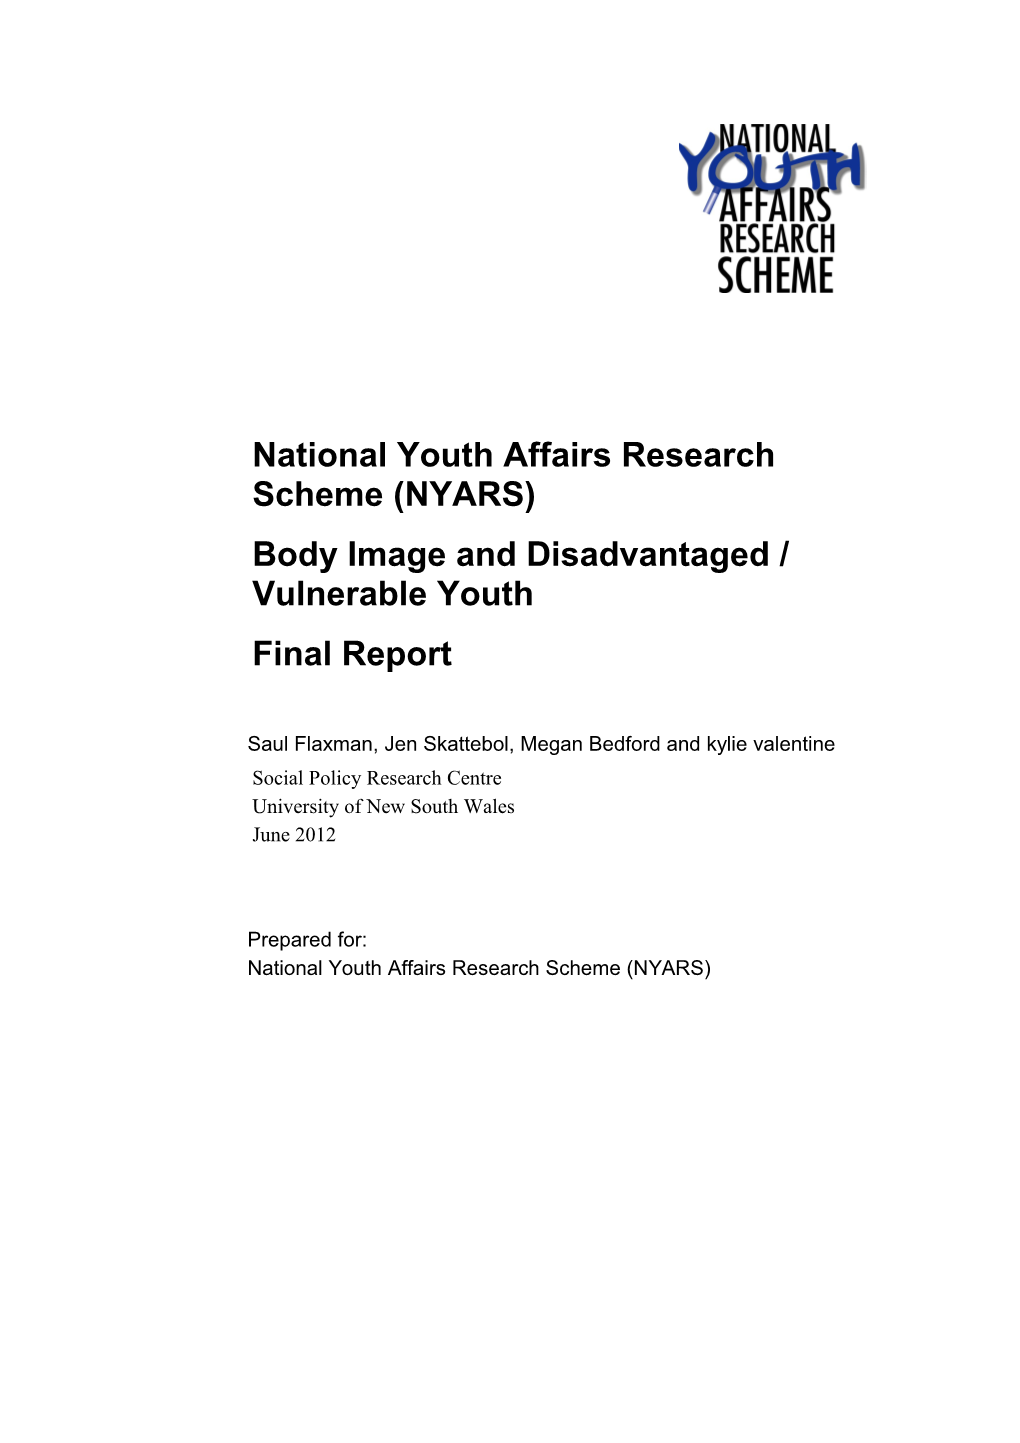 National Youth Affairs Research Scheme (NYARS)